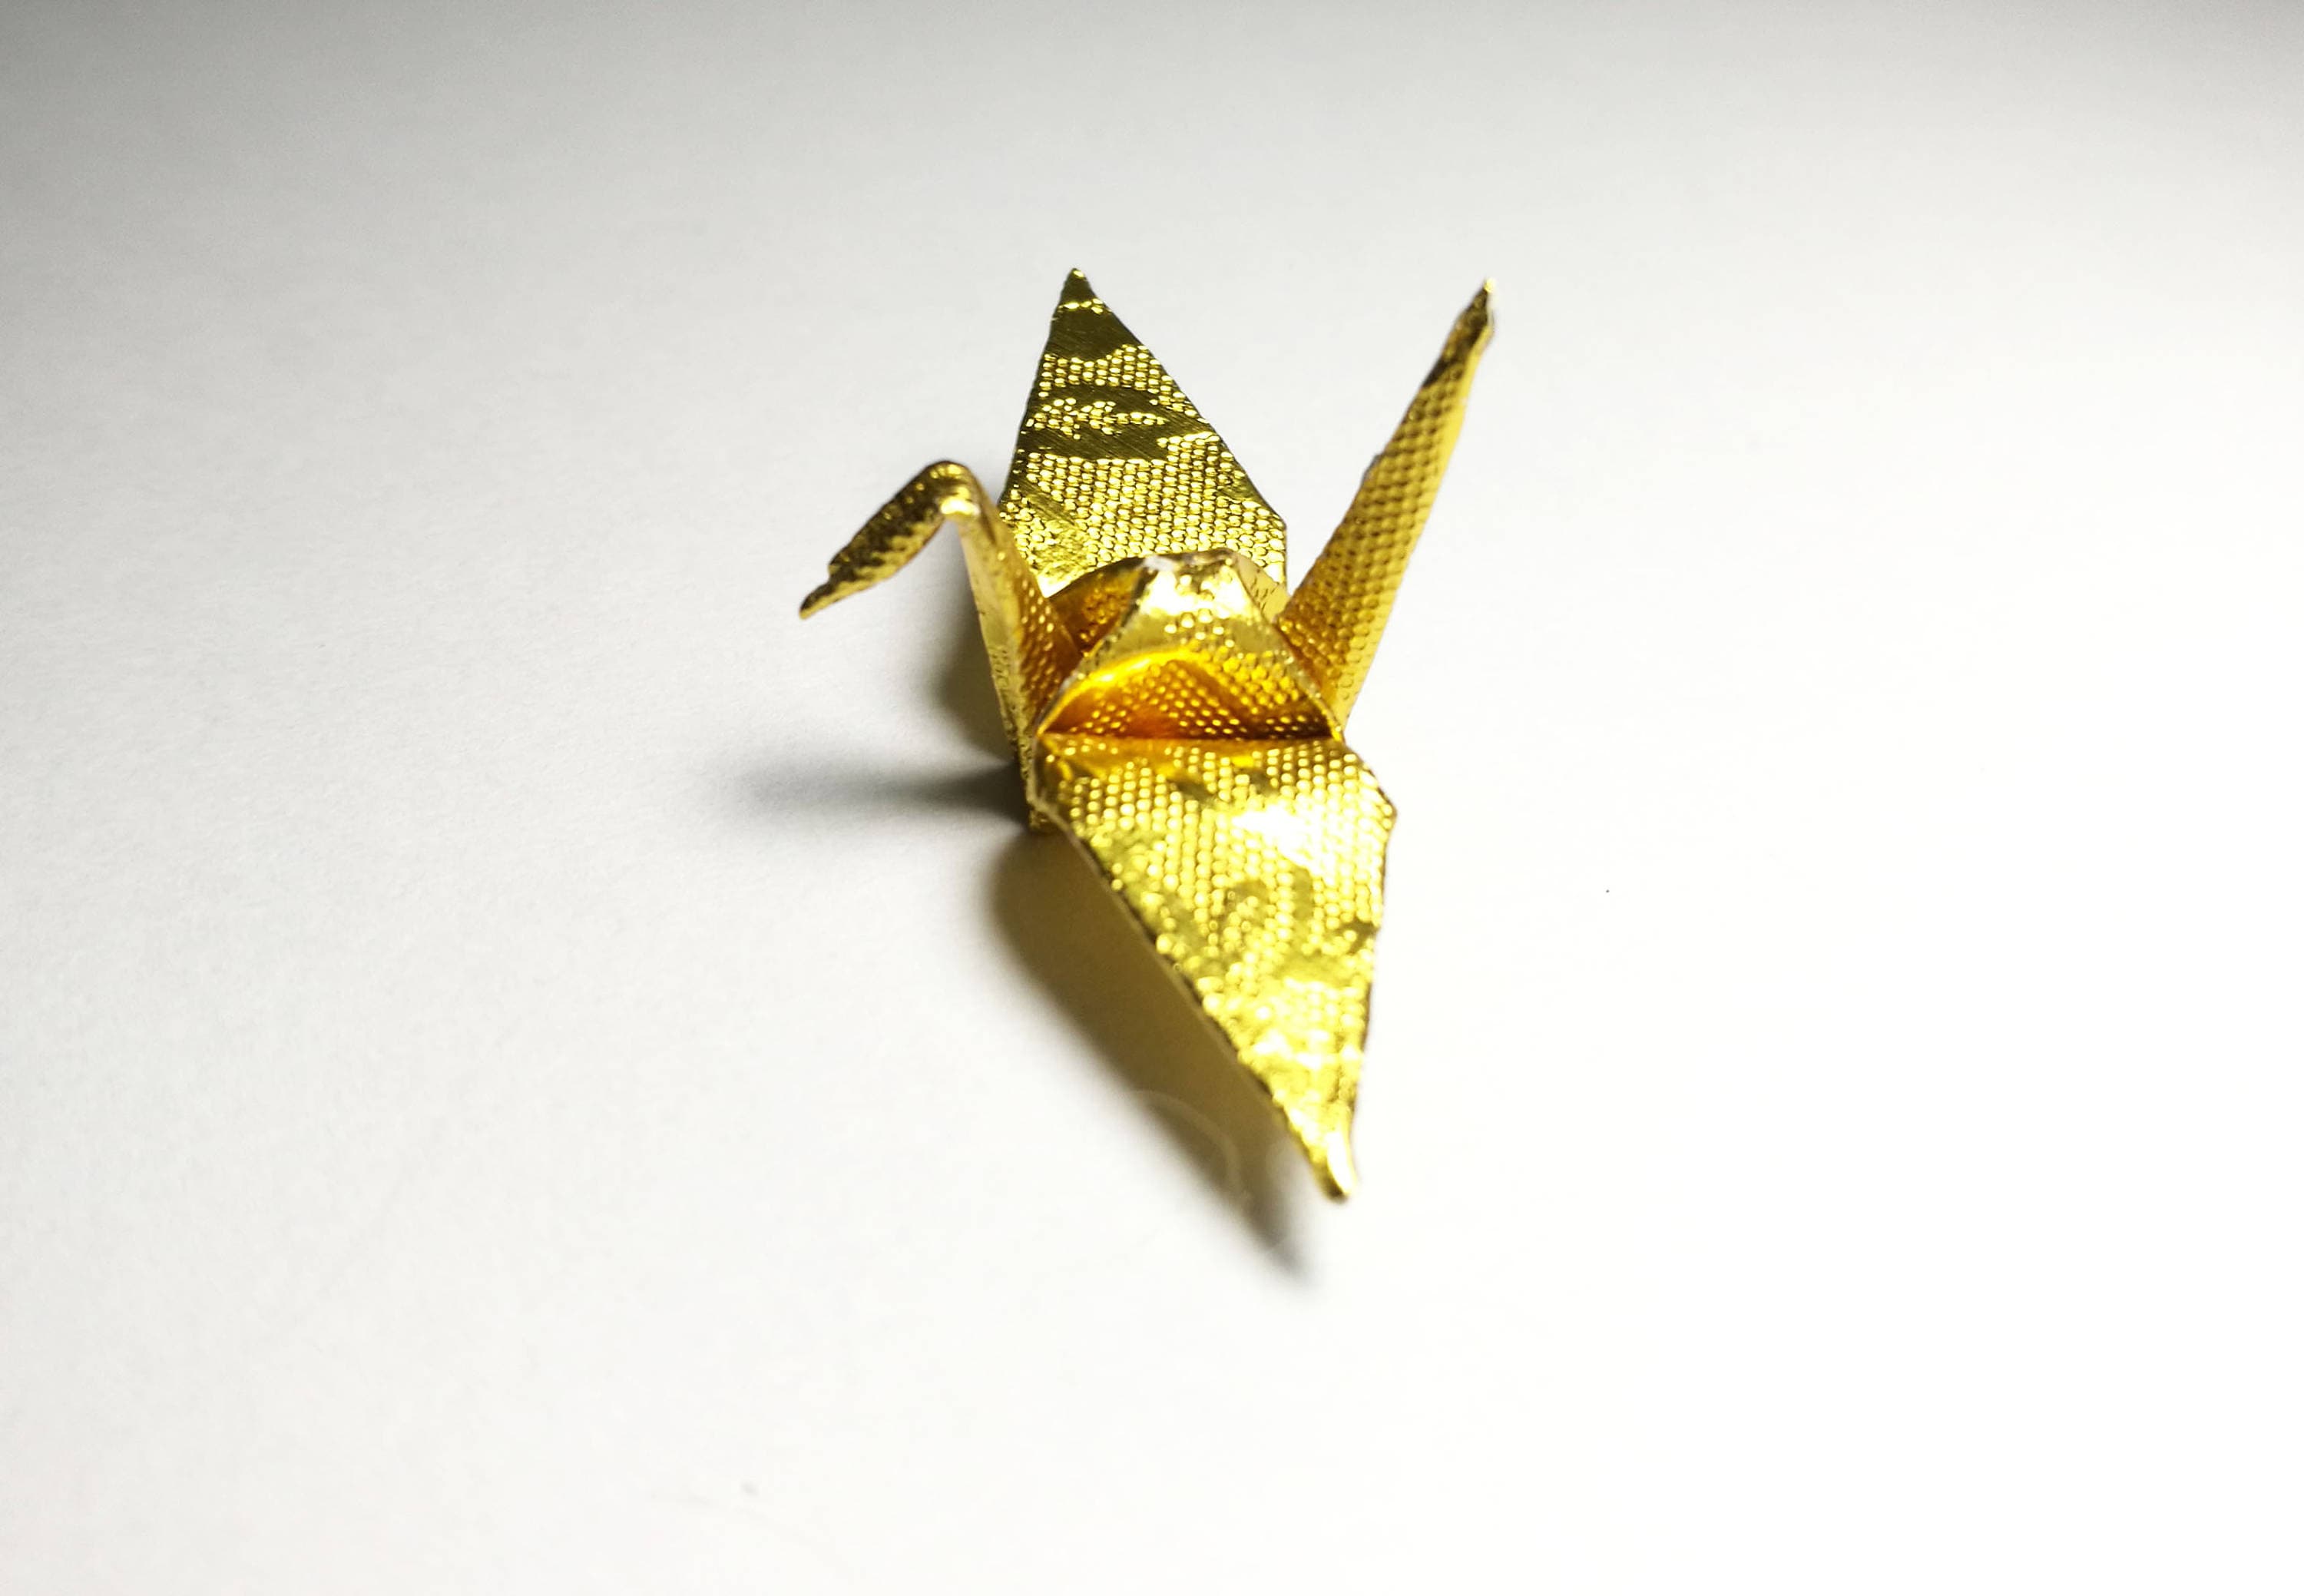 1000 Gold Rose Pattern Origami Paper Crane Made Small 1.5 inch for Wedding Gift, Decoration, Wedding Backdrop